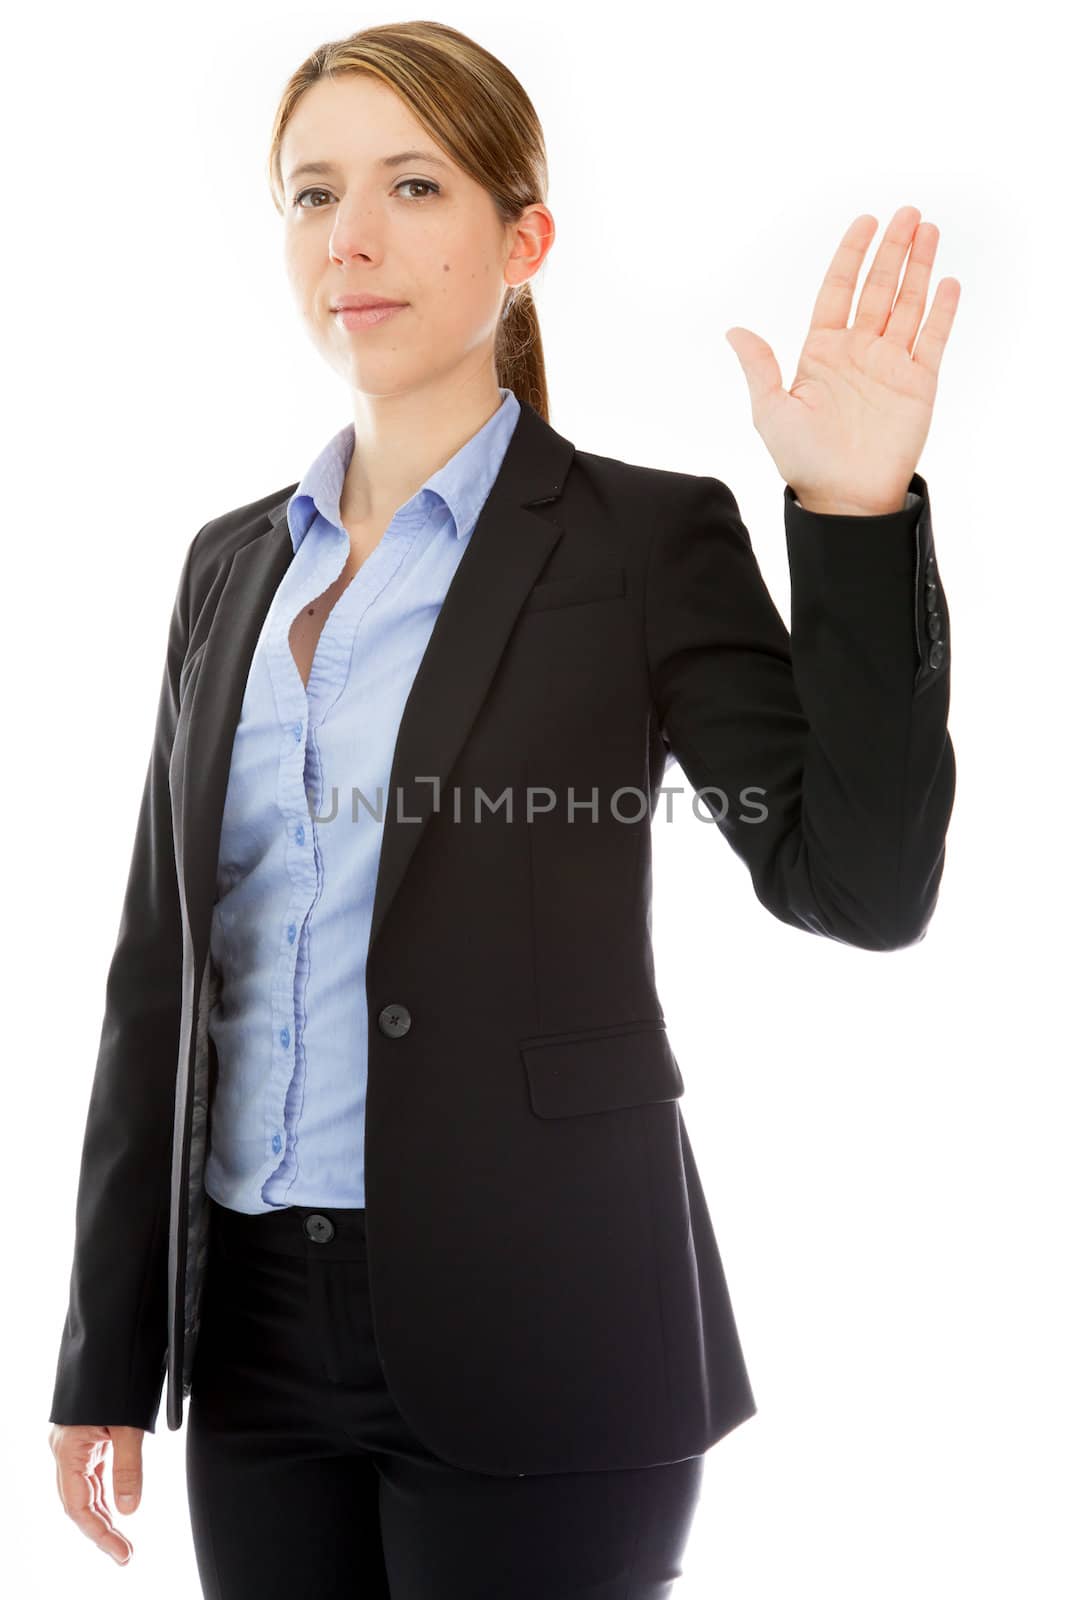 Attractive caucasion business woman in her 30s shot in studio isolated on a white background